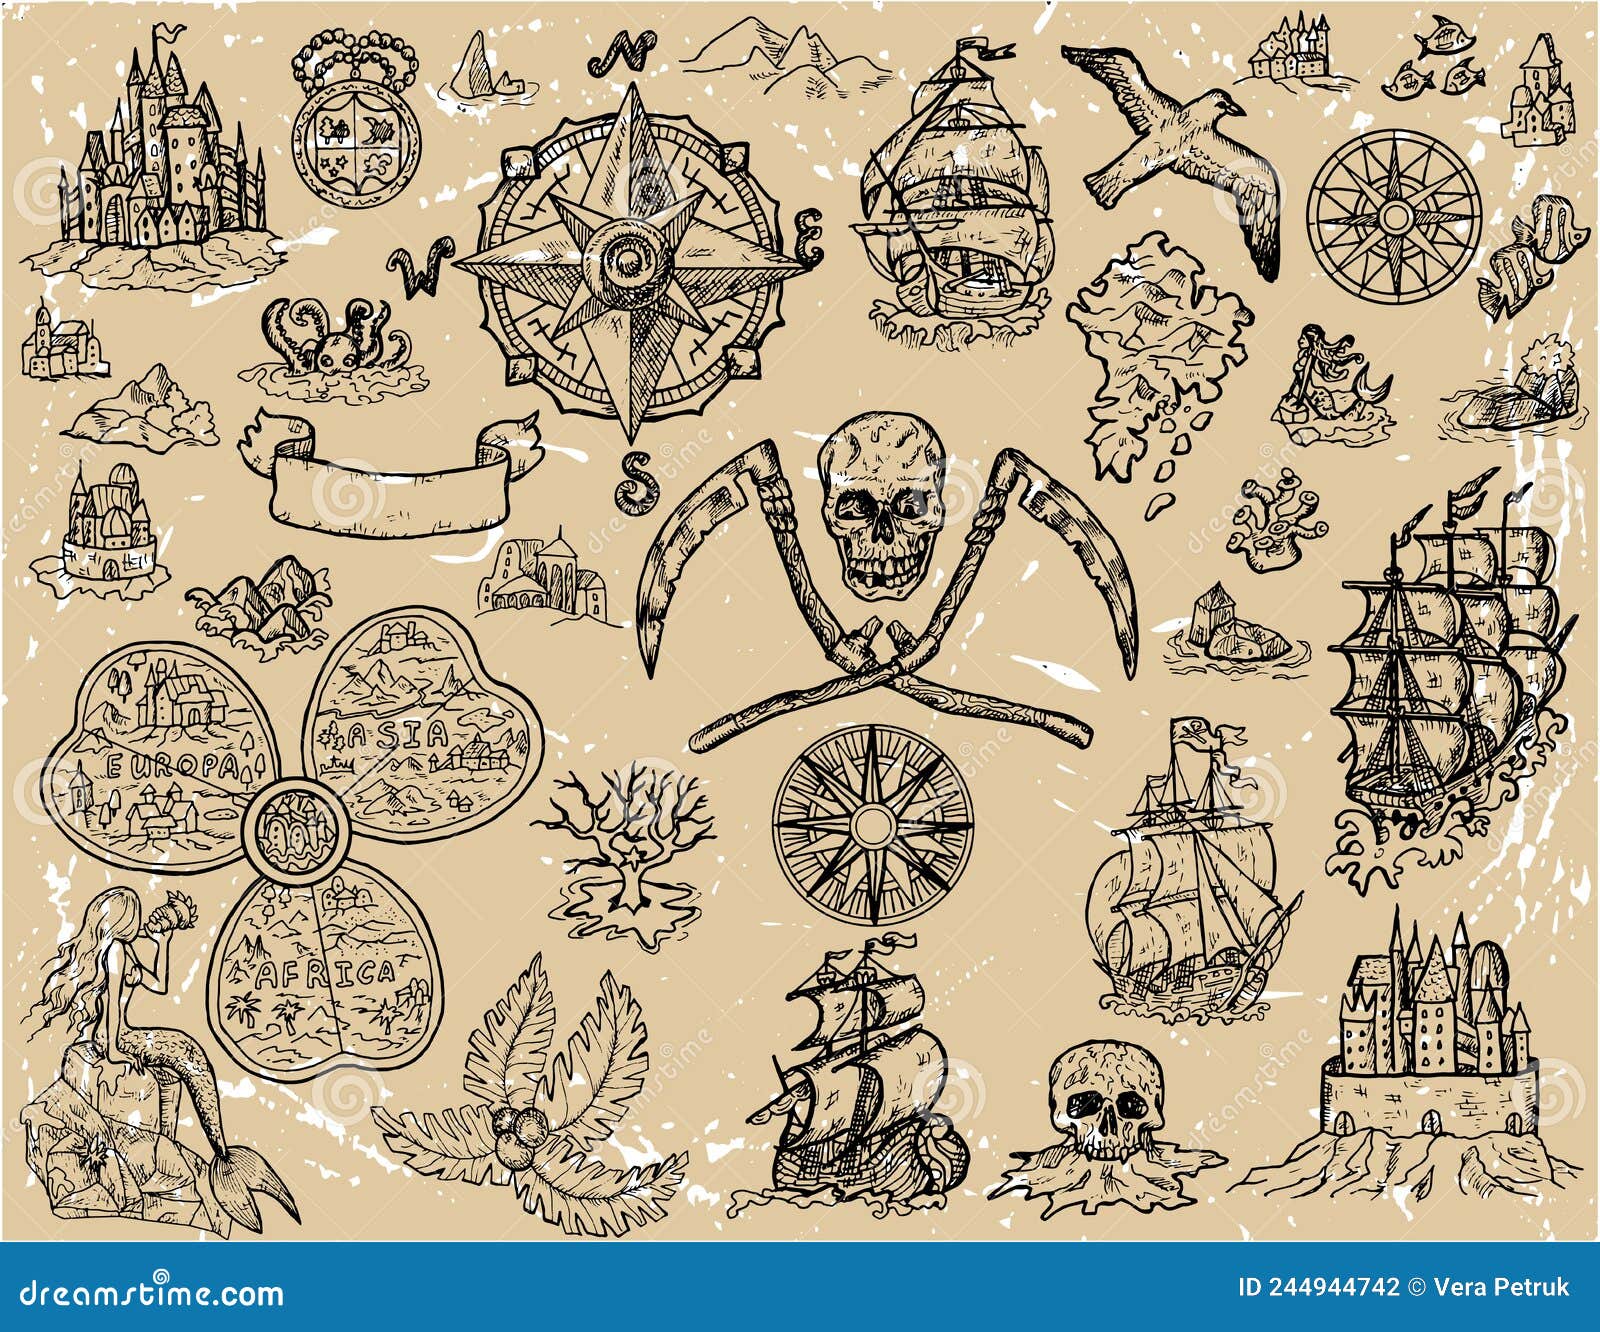 Design Set with Old Pirate Map Elements - Sailboat, Crossbones, Unknown ...